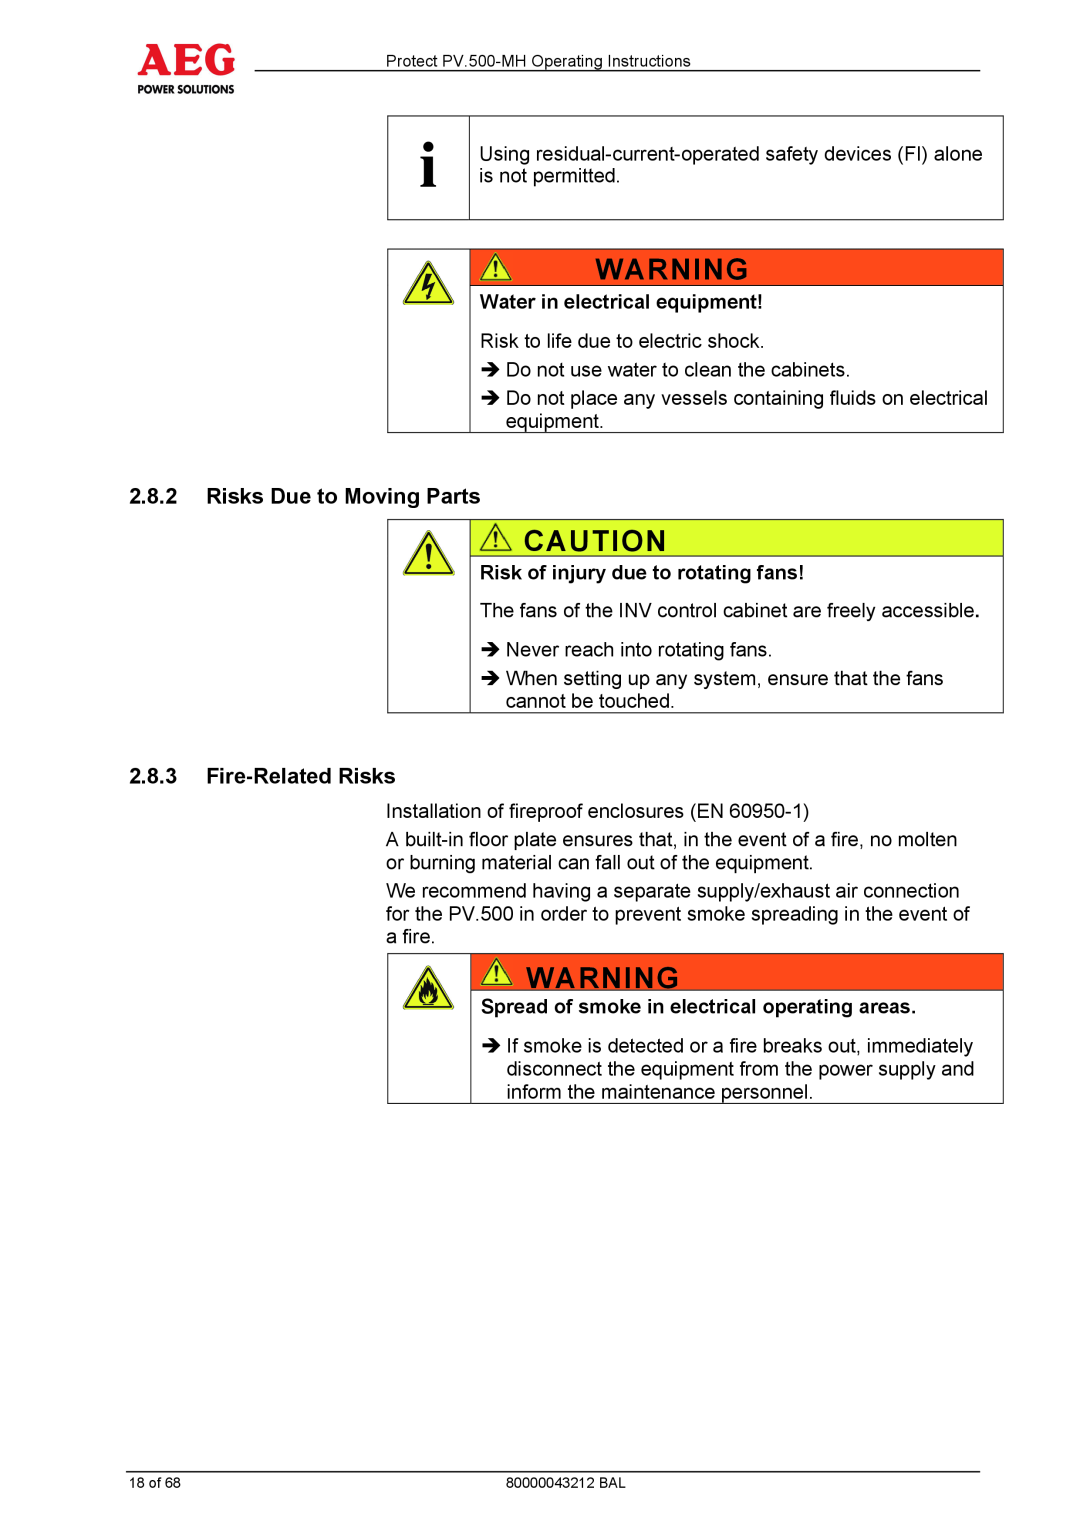 AEG PV.500-MH manual 2.8.2Risks Due to Moving Parts, 2.8.3Fire-RelatedRisks, Water in electrical equipment 